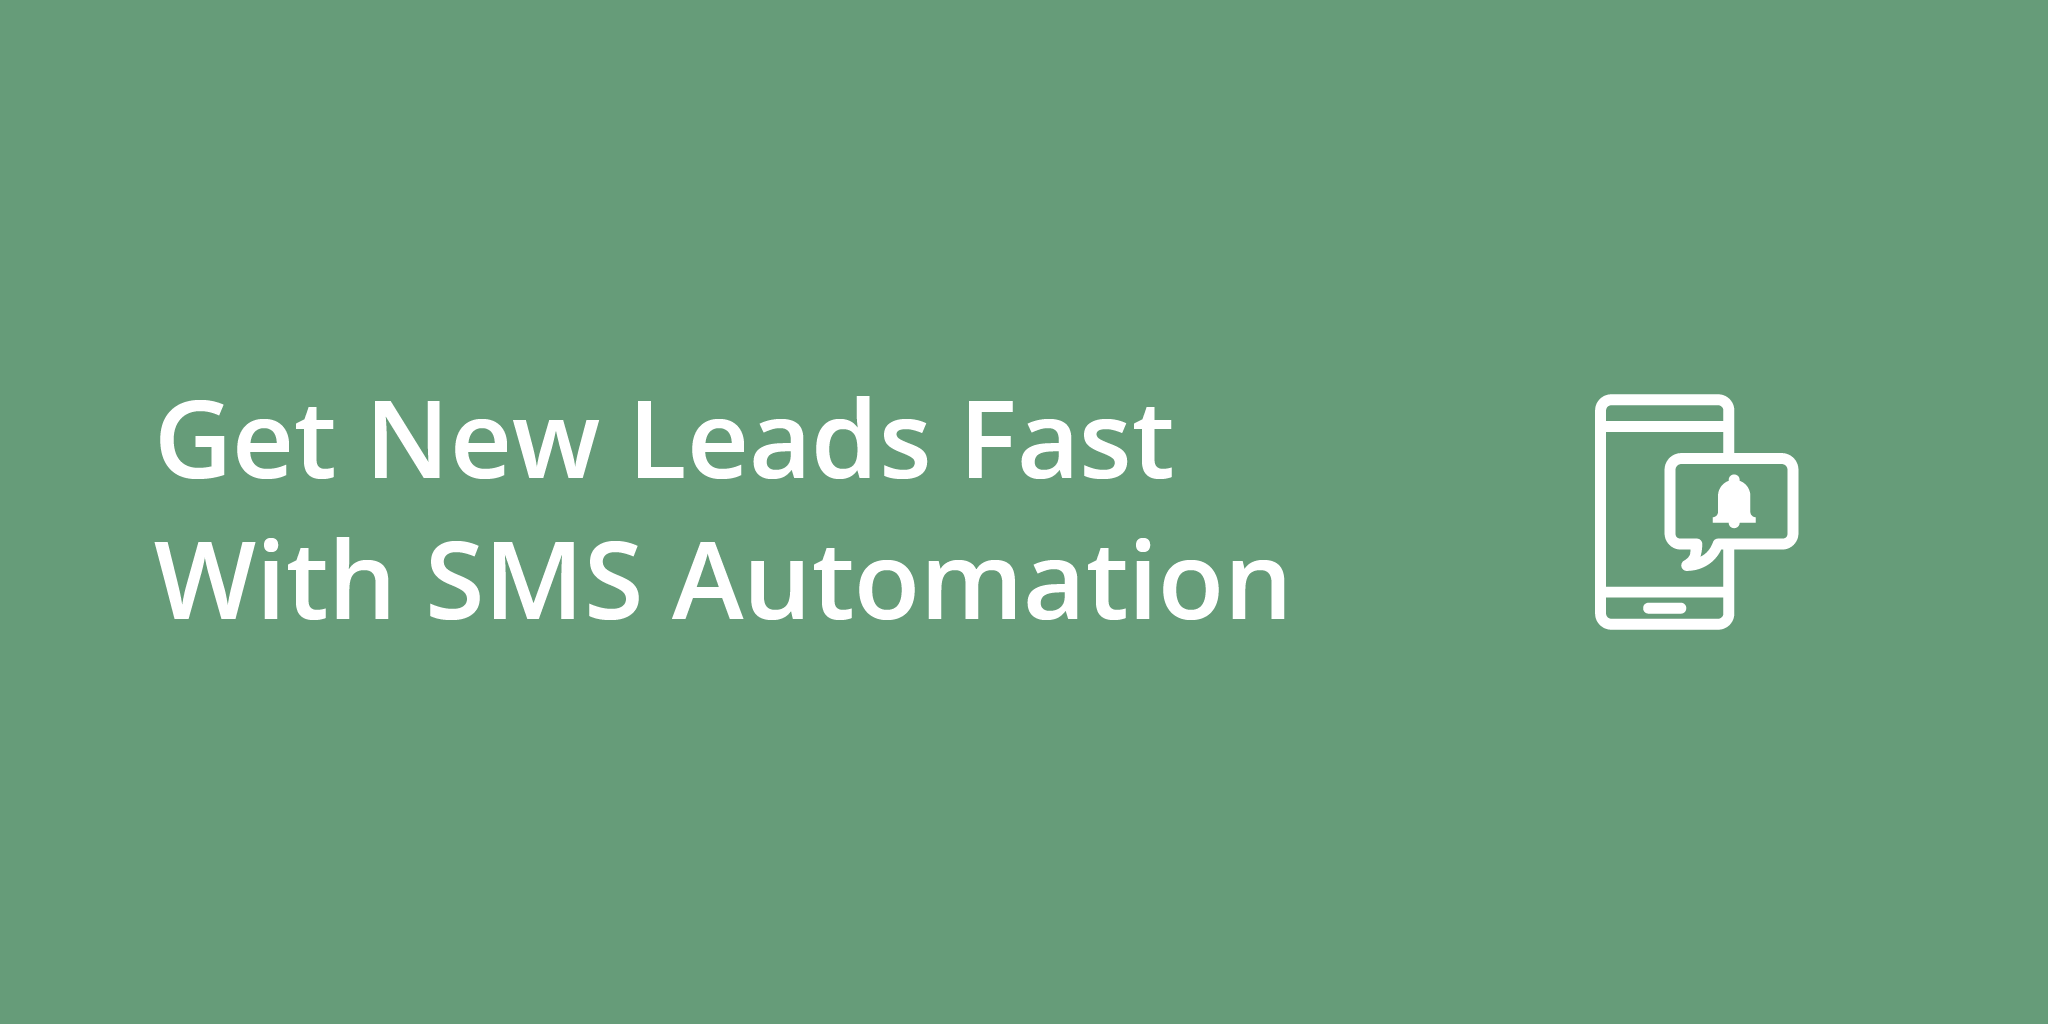 How Can I Get New Leads Fast With SMS Automation? | Telephones for business